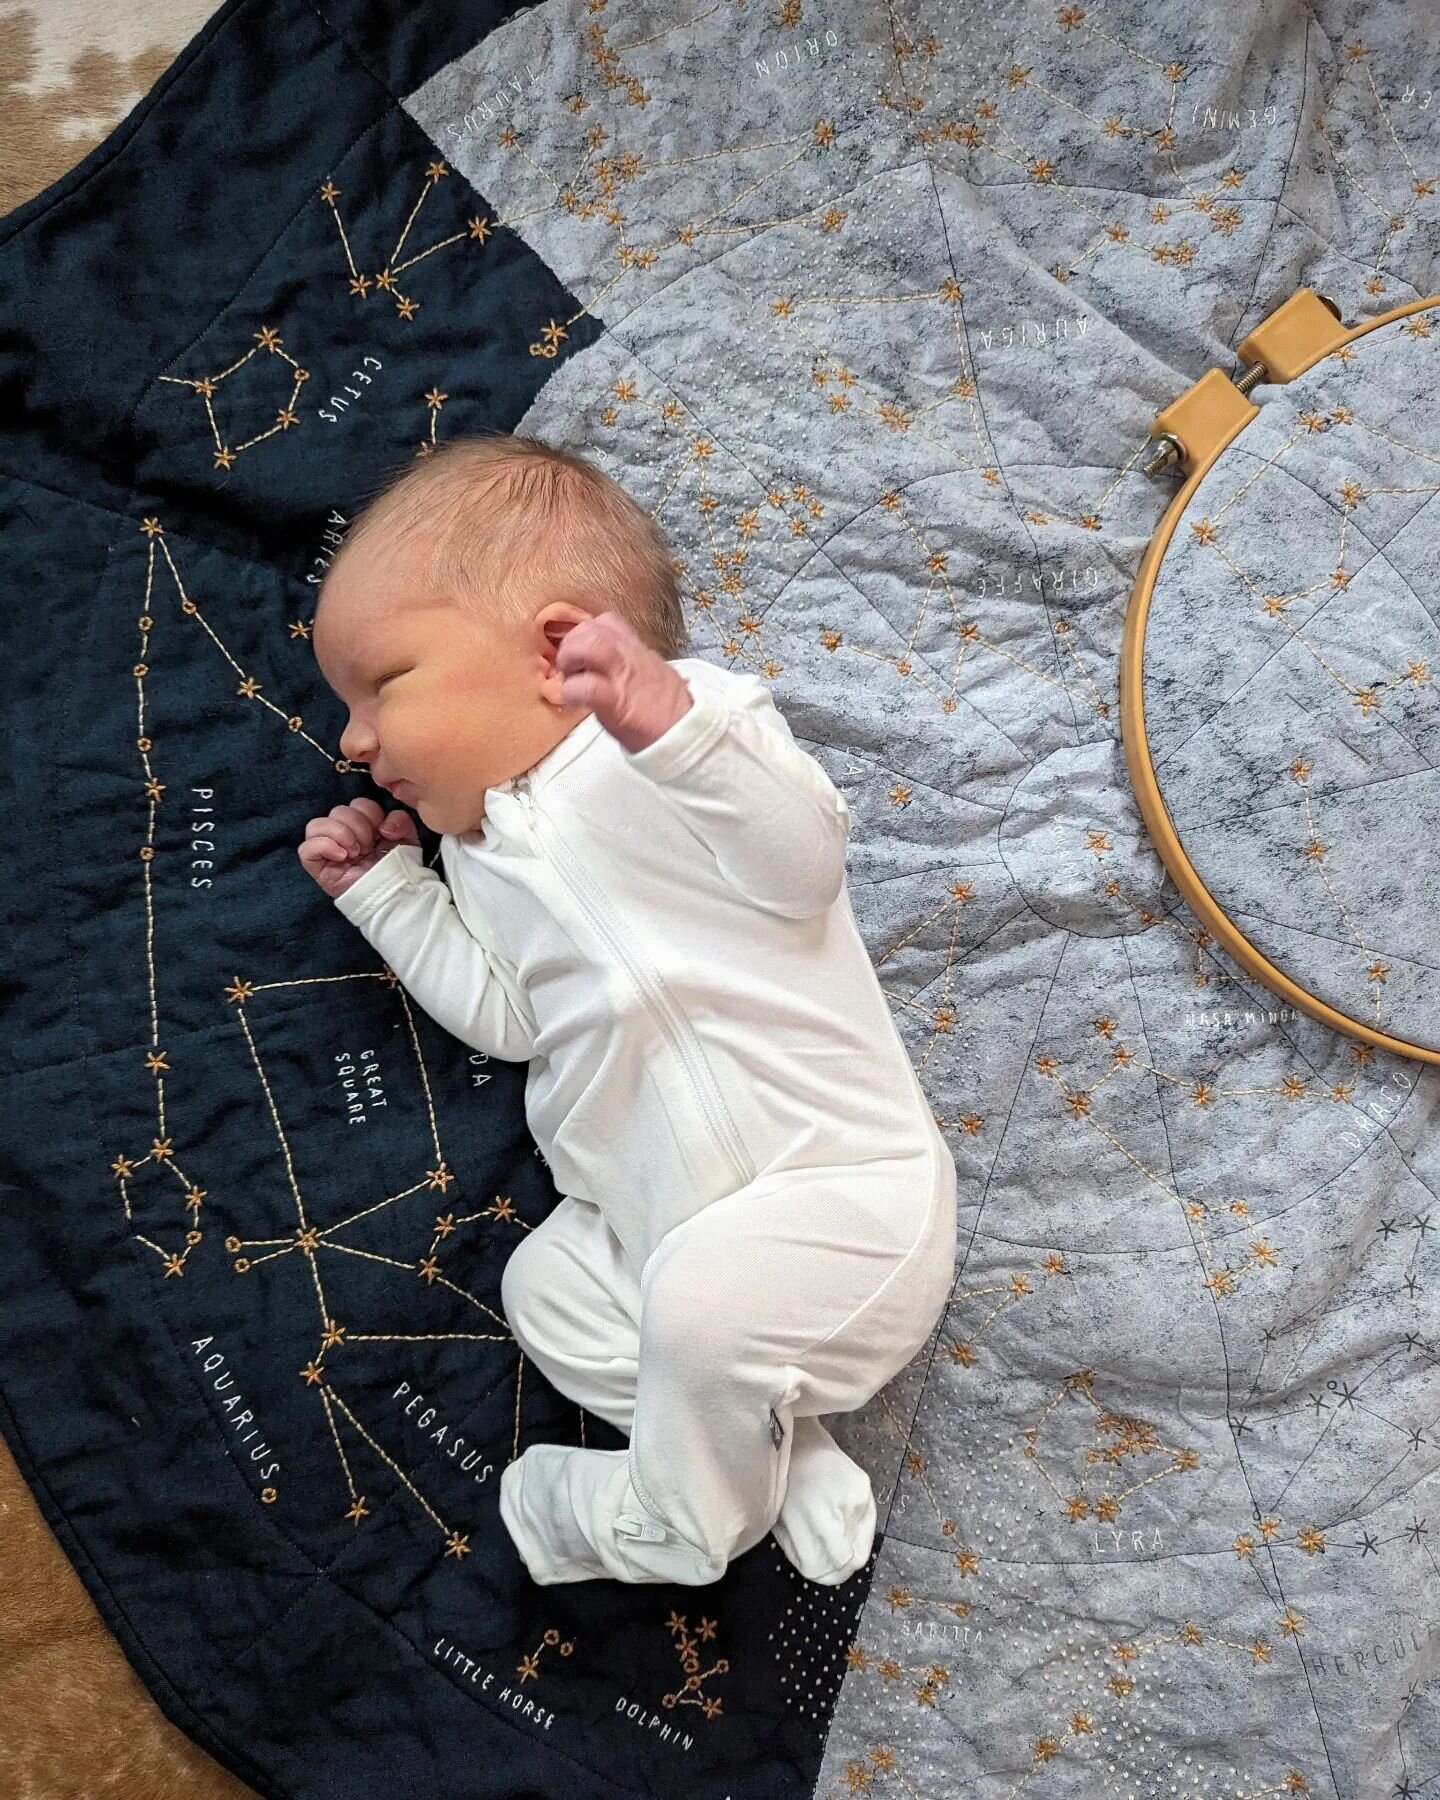 Our sweet baby boy, Malcolm, is here! 💙 Everyone is healthy and we are happily settling into life as a family of four. 

As seems fitting with a toddler around, I didn't *quite* get his tummy time quilt finished, so I thought it'd be fun to capture 